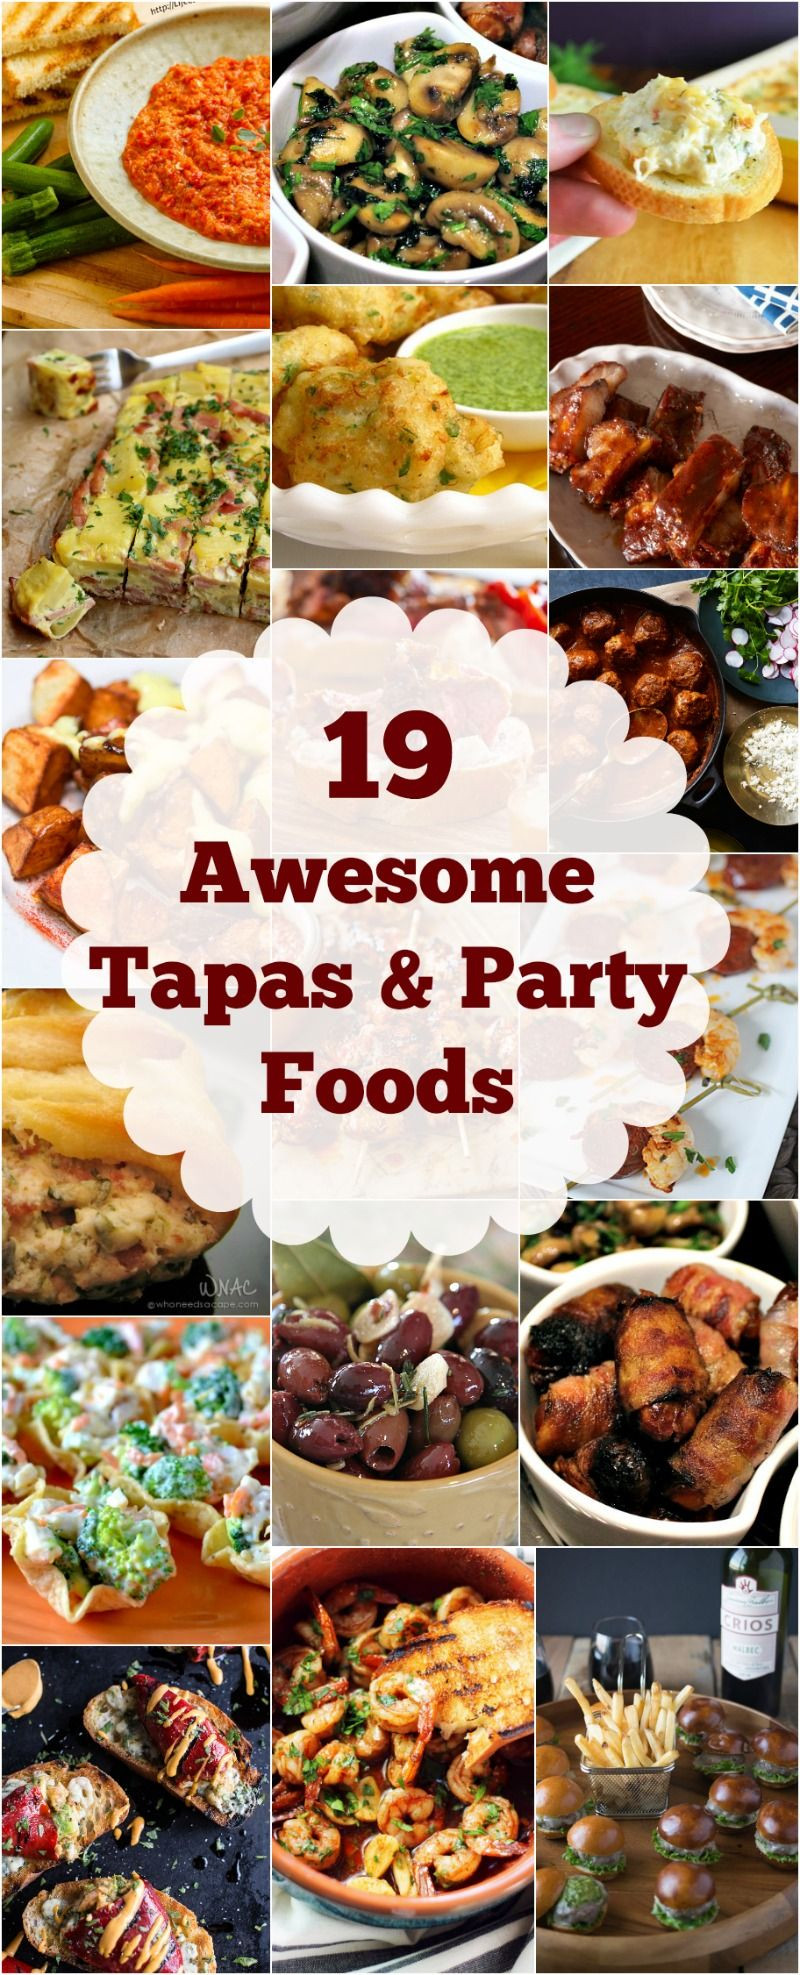 Spanish Food Ideas For A Party
 19 AWESOME TAPAS & PARTY FOODS EVERYONE WILL ENJOY